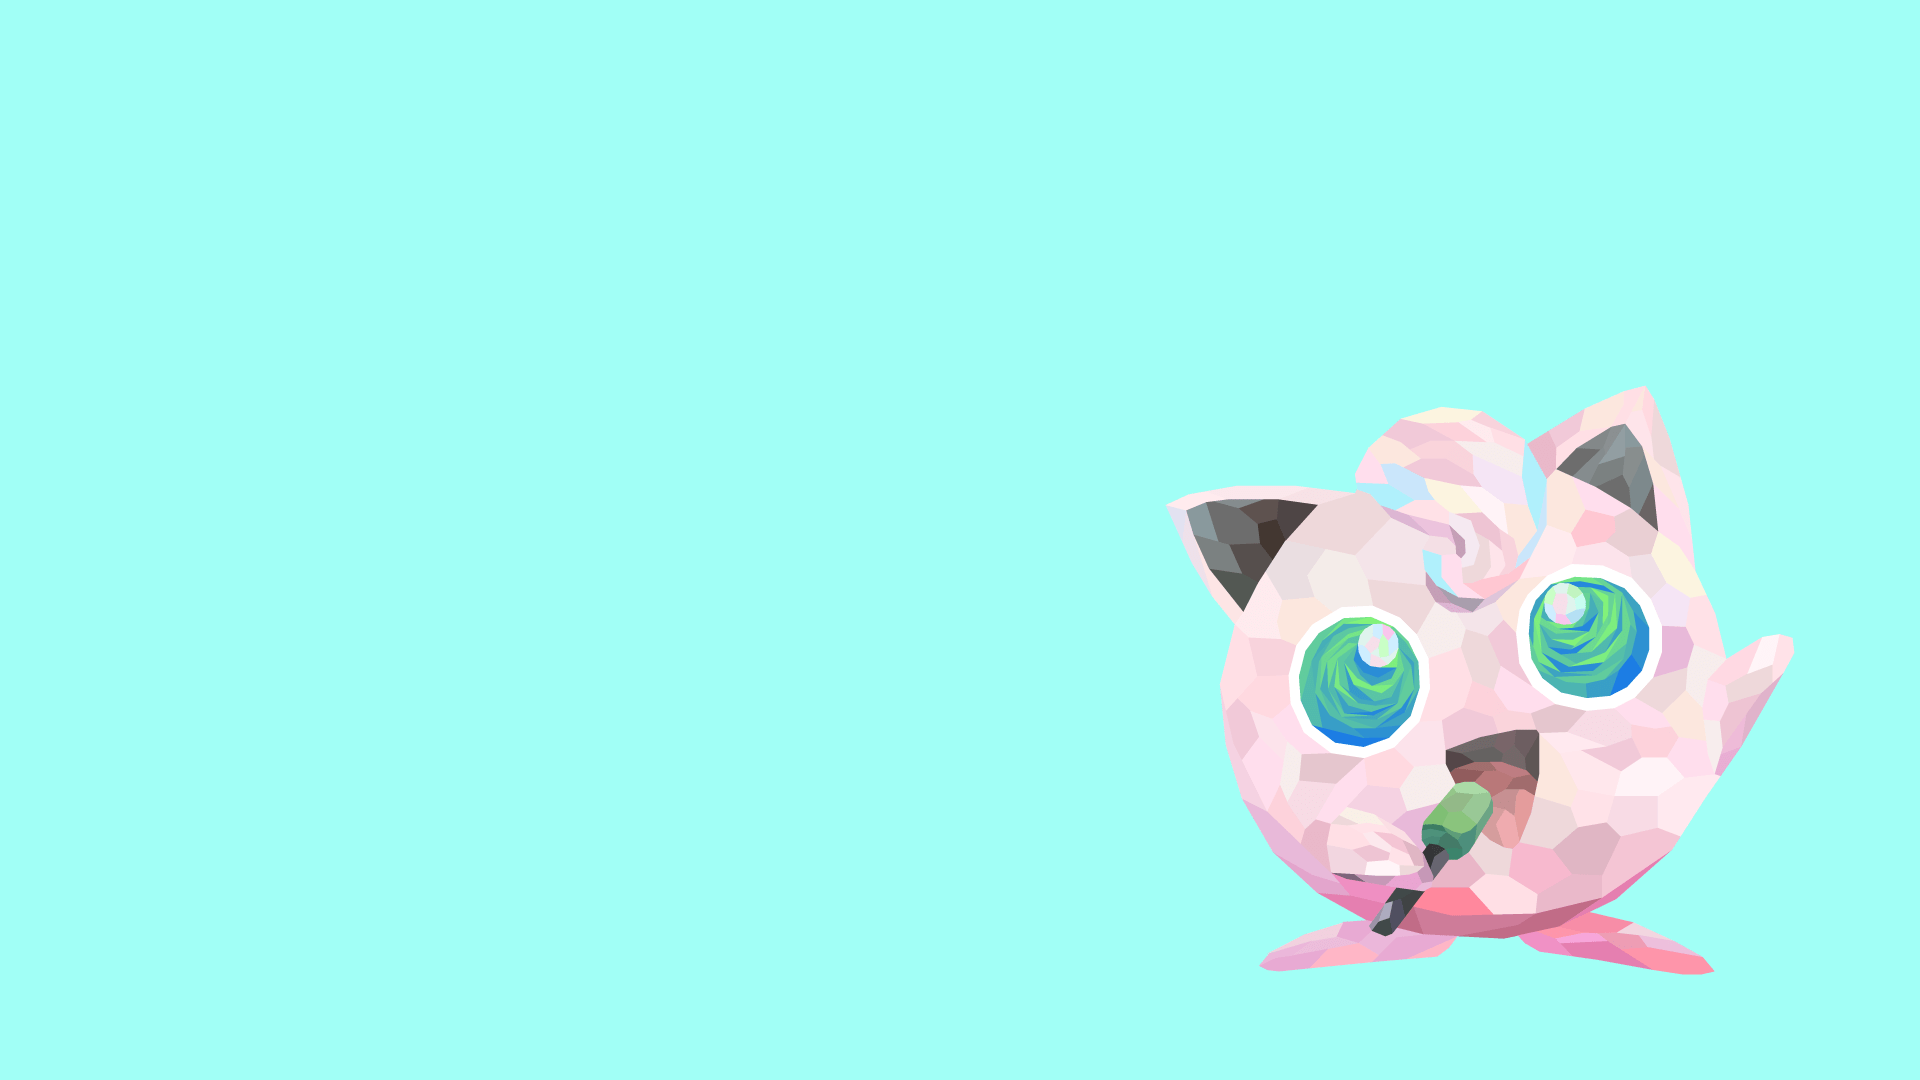 A pink cat with green eyes and blue background - Low poly